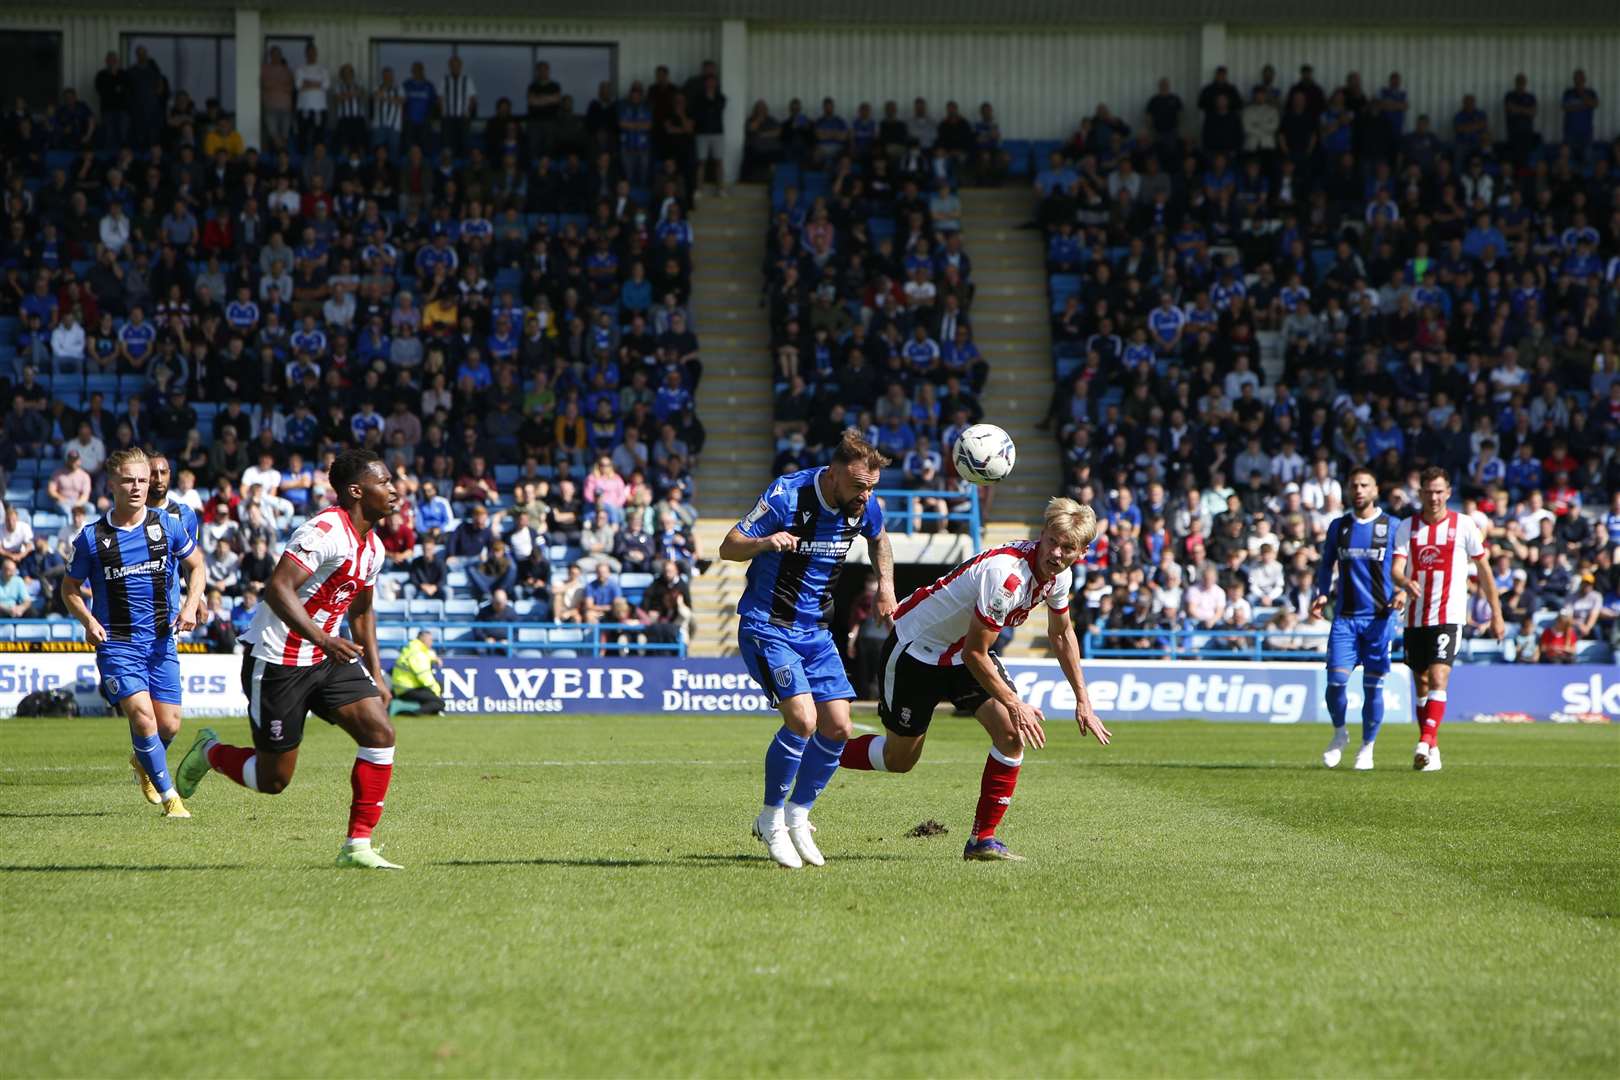 Gillingham fans back at Priestfield for a competitive fixture Picture: Andy Jones